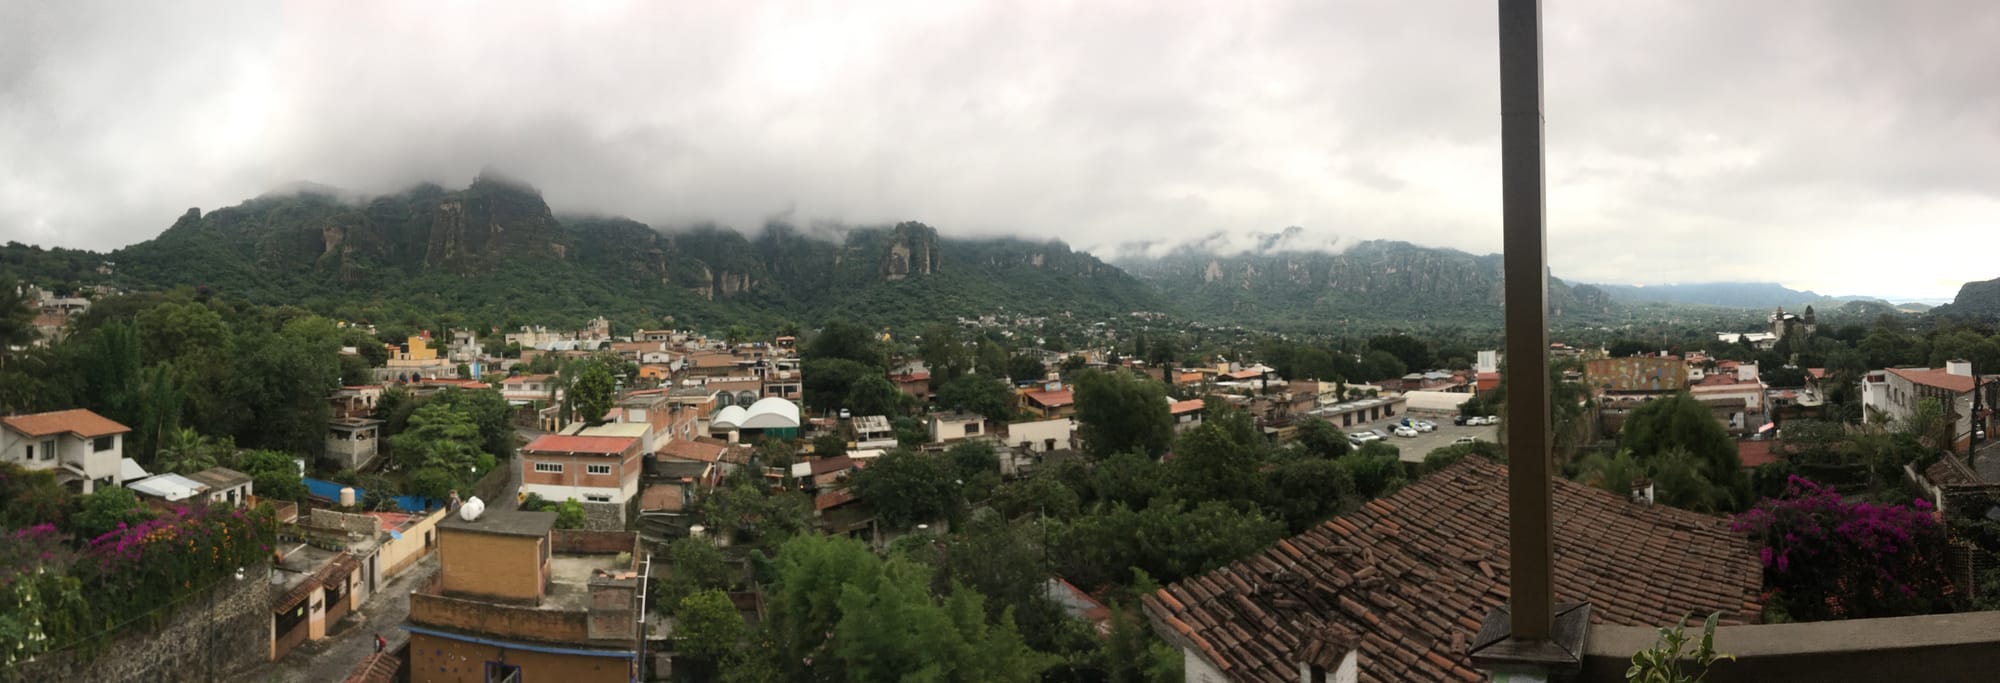 The magical city of Tepoztlán. Somewhere in the wisps of clouds, a pyramid is hidden on top of the mountain.